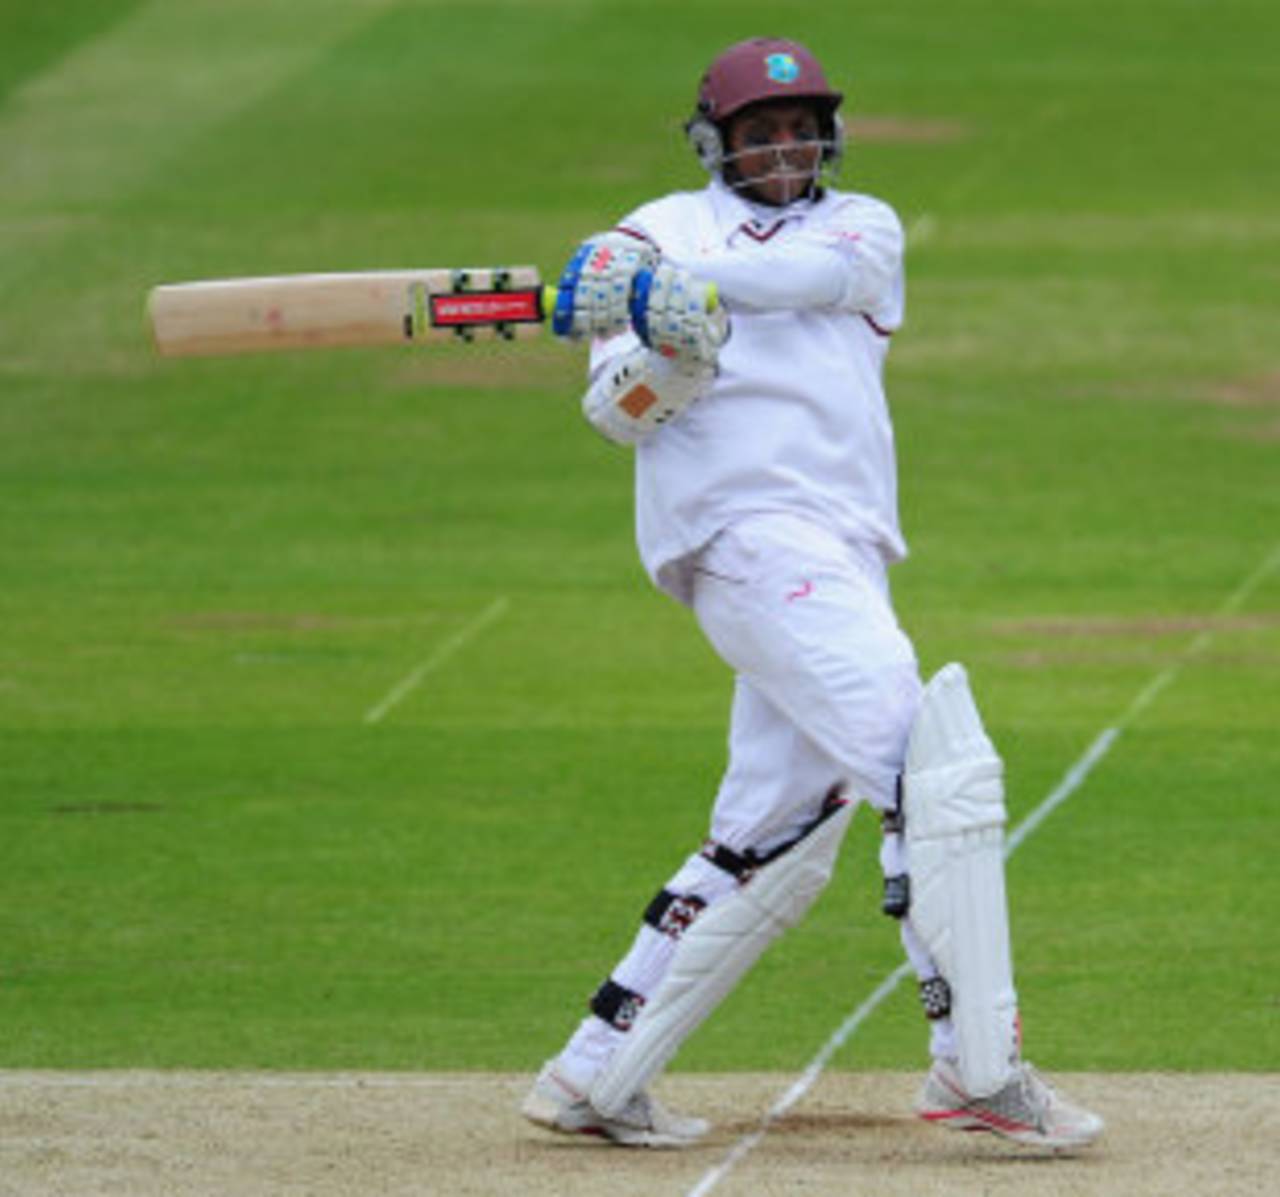 Shivnarine Chanderpaul held firm for West Indies, England v West Indies, 1st Test, Lord's, 1st day, May 17, 2012